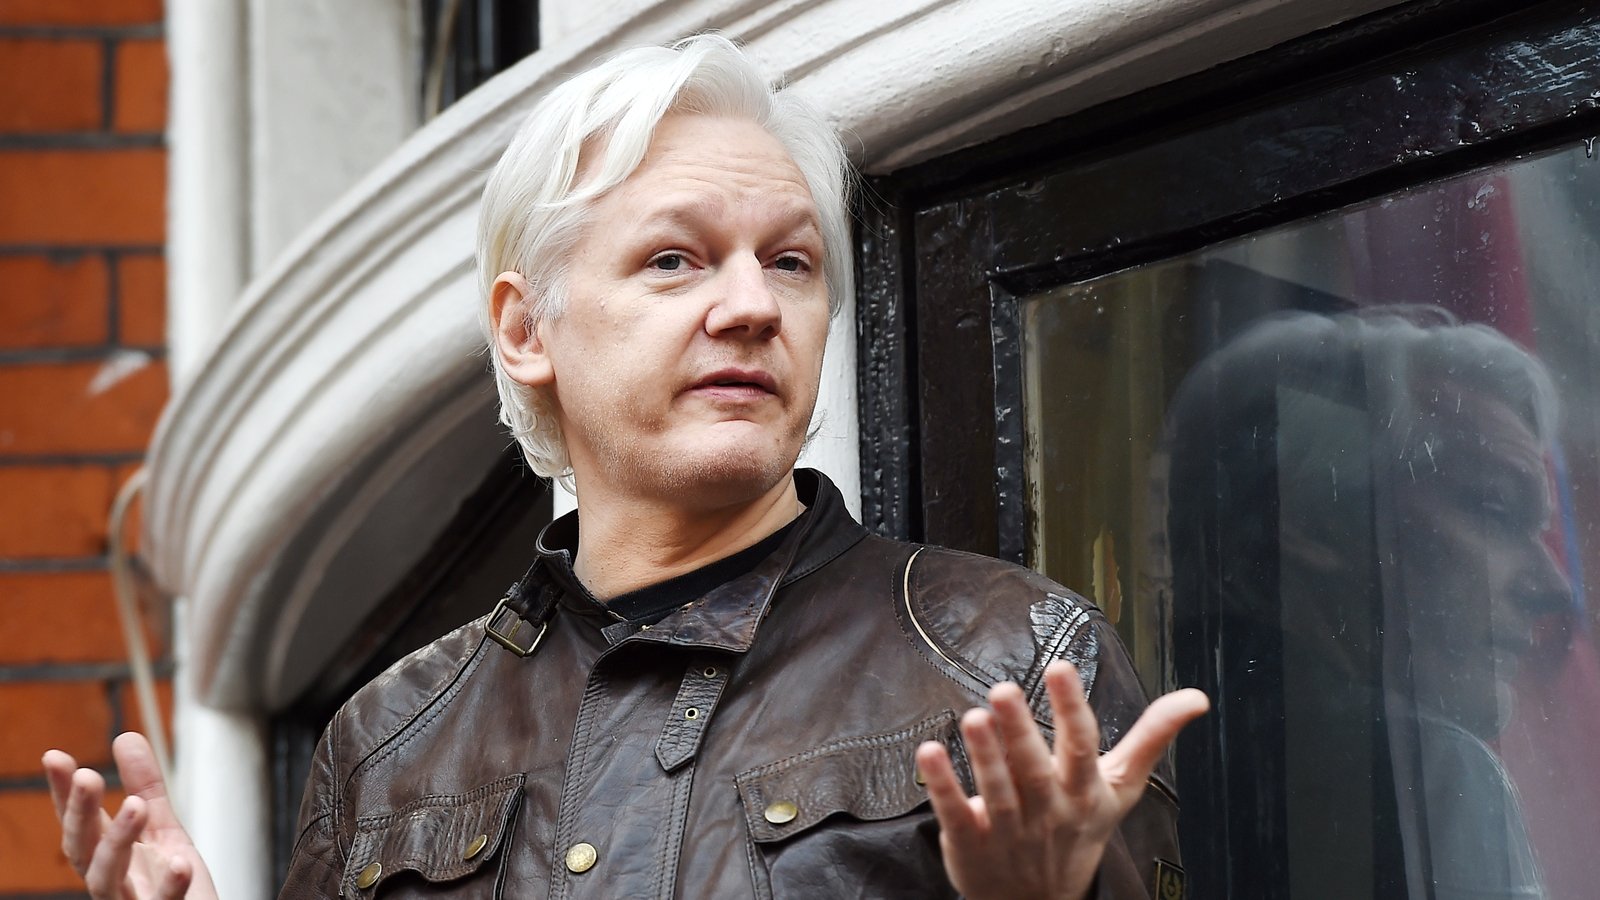 WikiLeaks’ Julian Assange cannot be extradited to the U.S. to face espionage charges, U.K. court rules